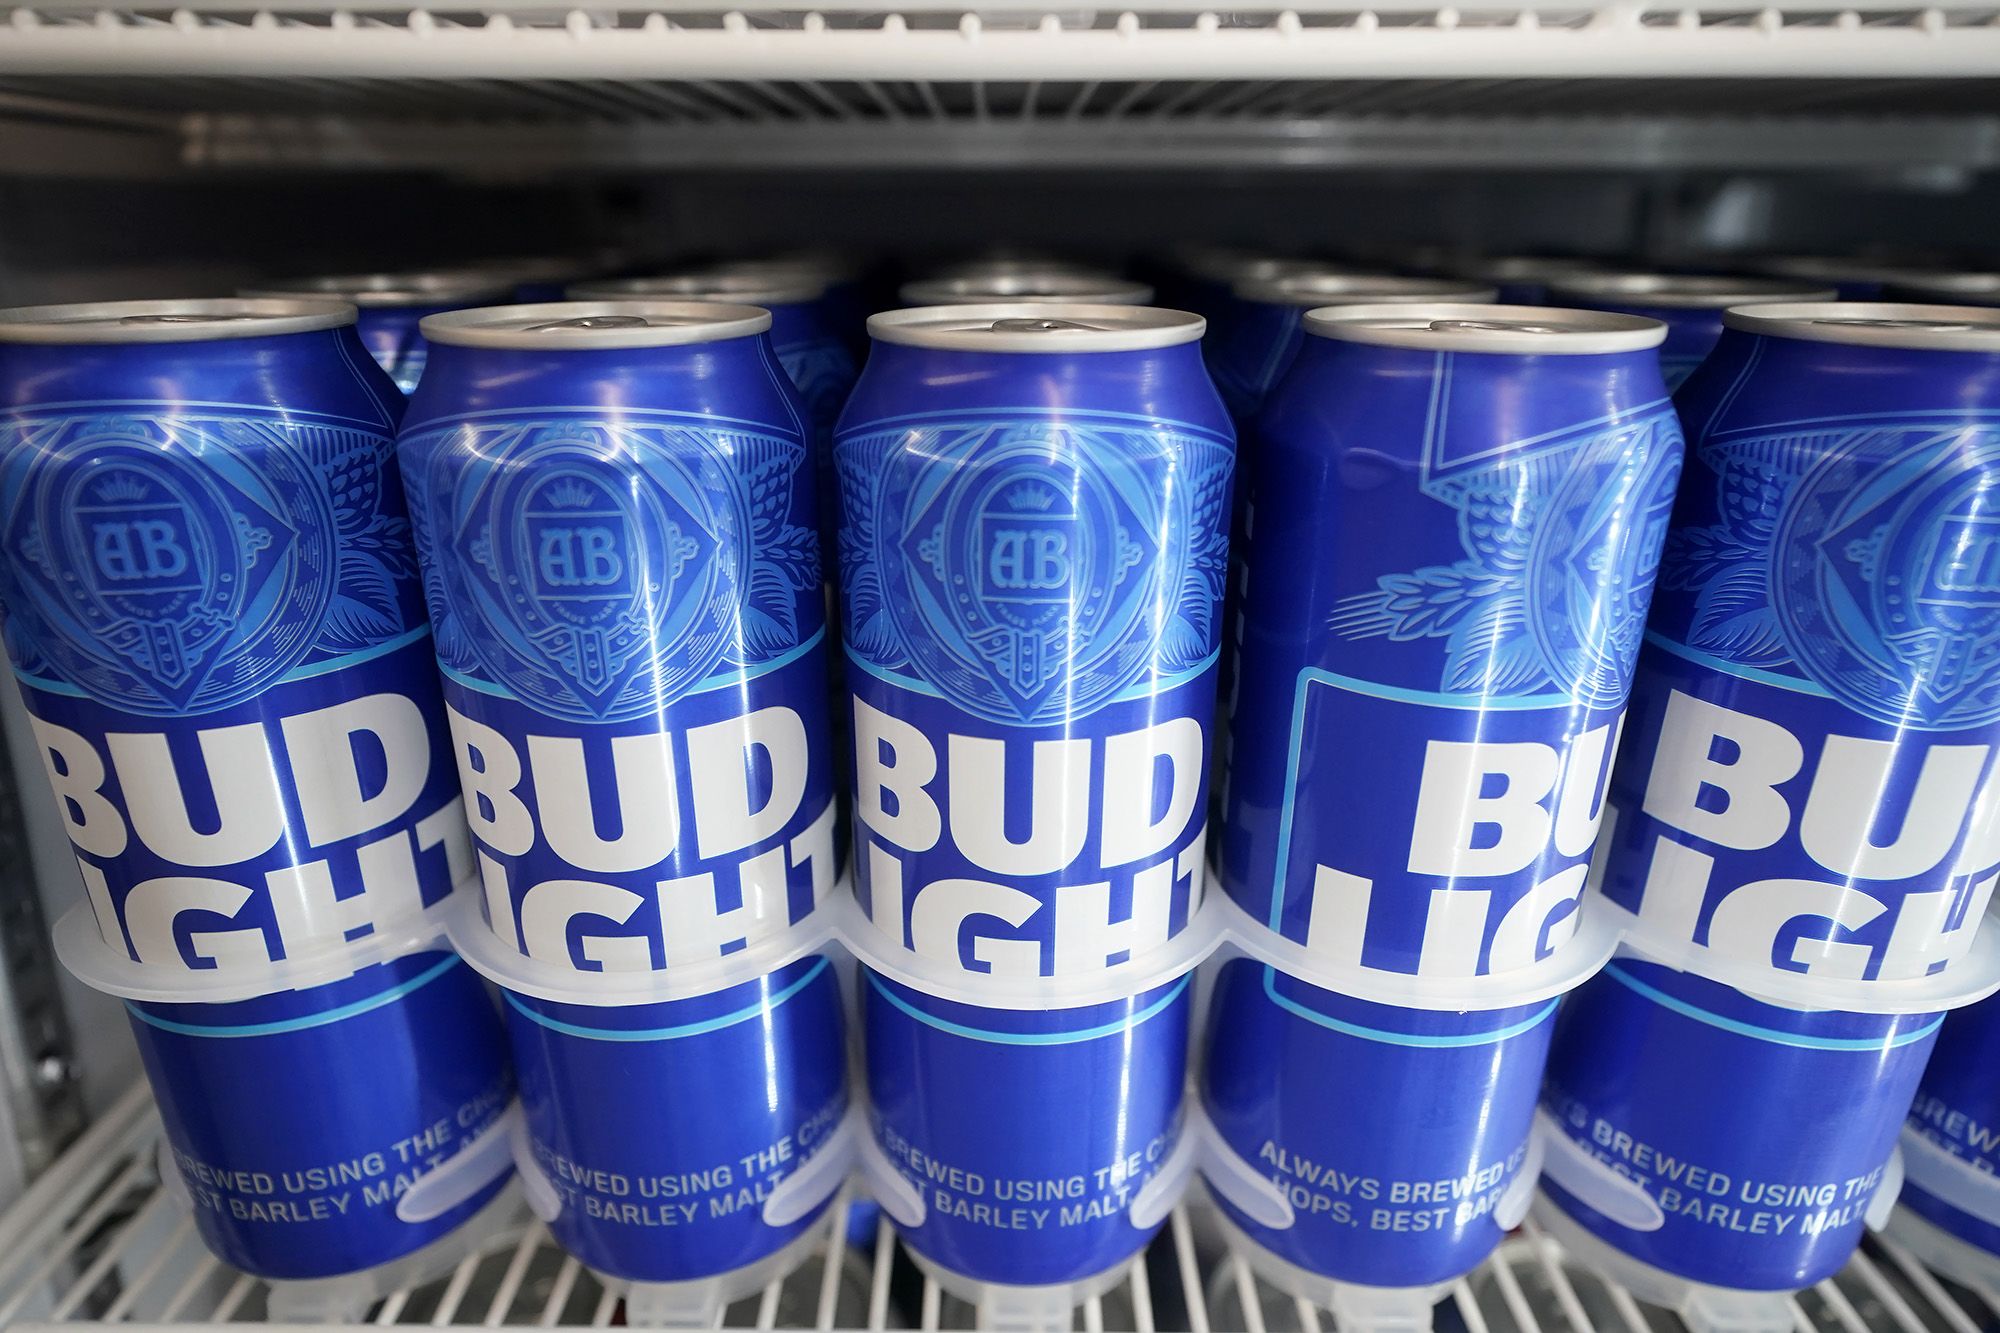 Bud Light sales slipping. But it remains America's top-selling beer | CNN Business